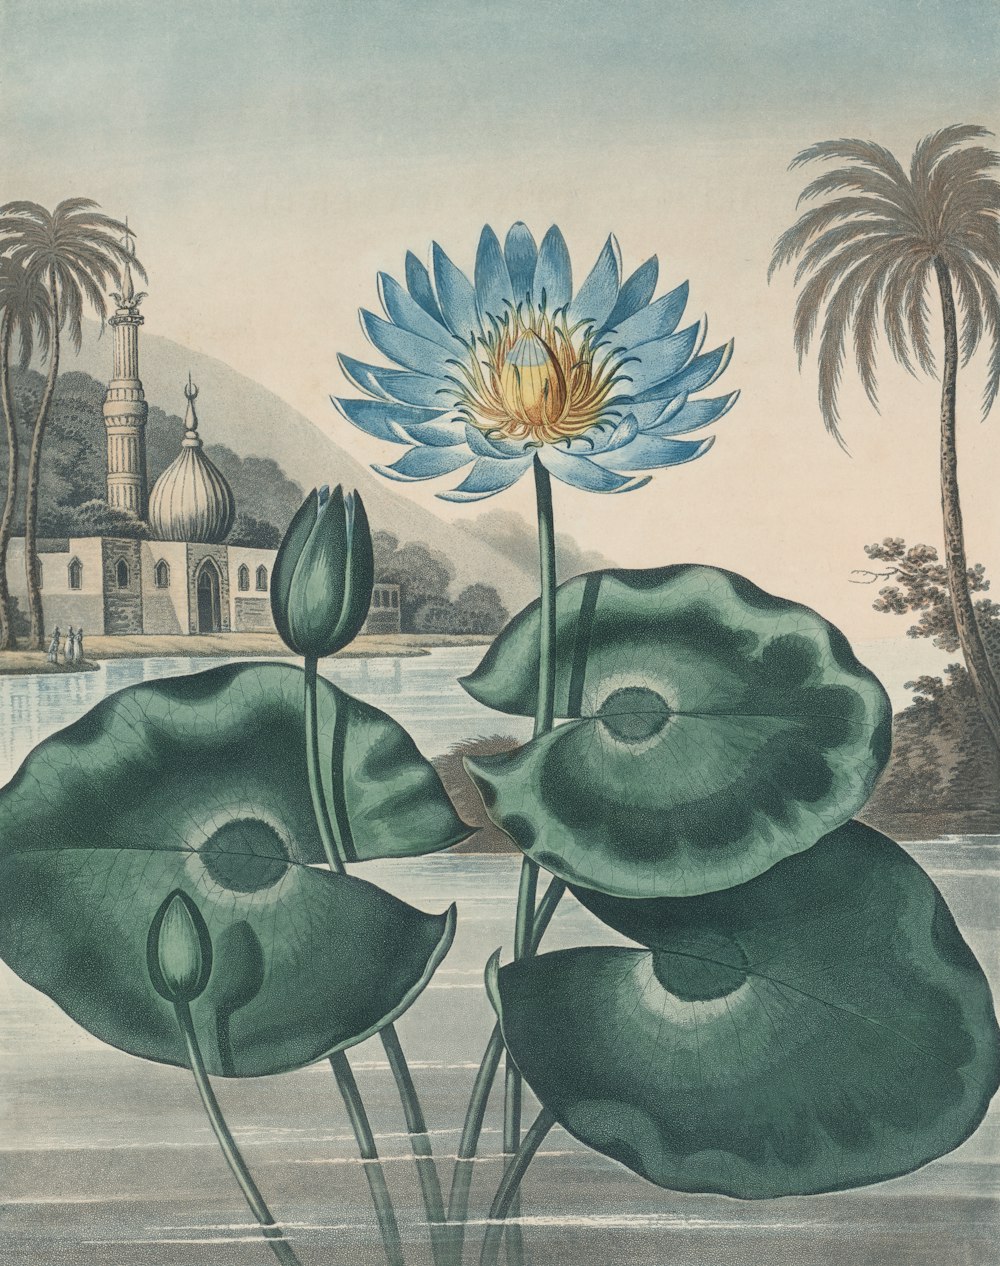 a painting of a blue lotus flower with a temple in the background